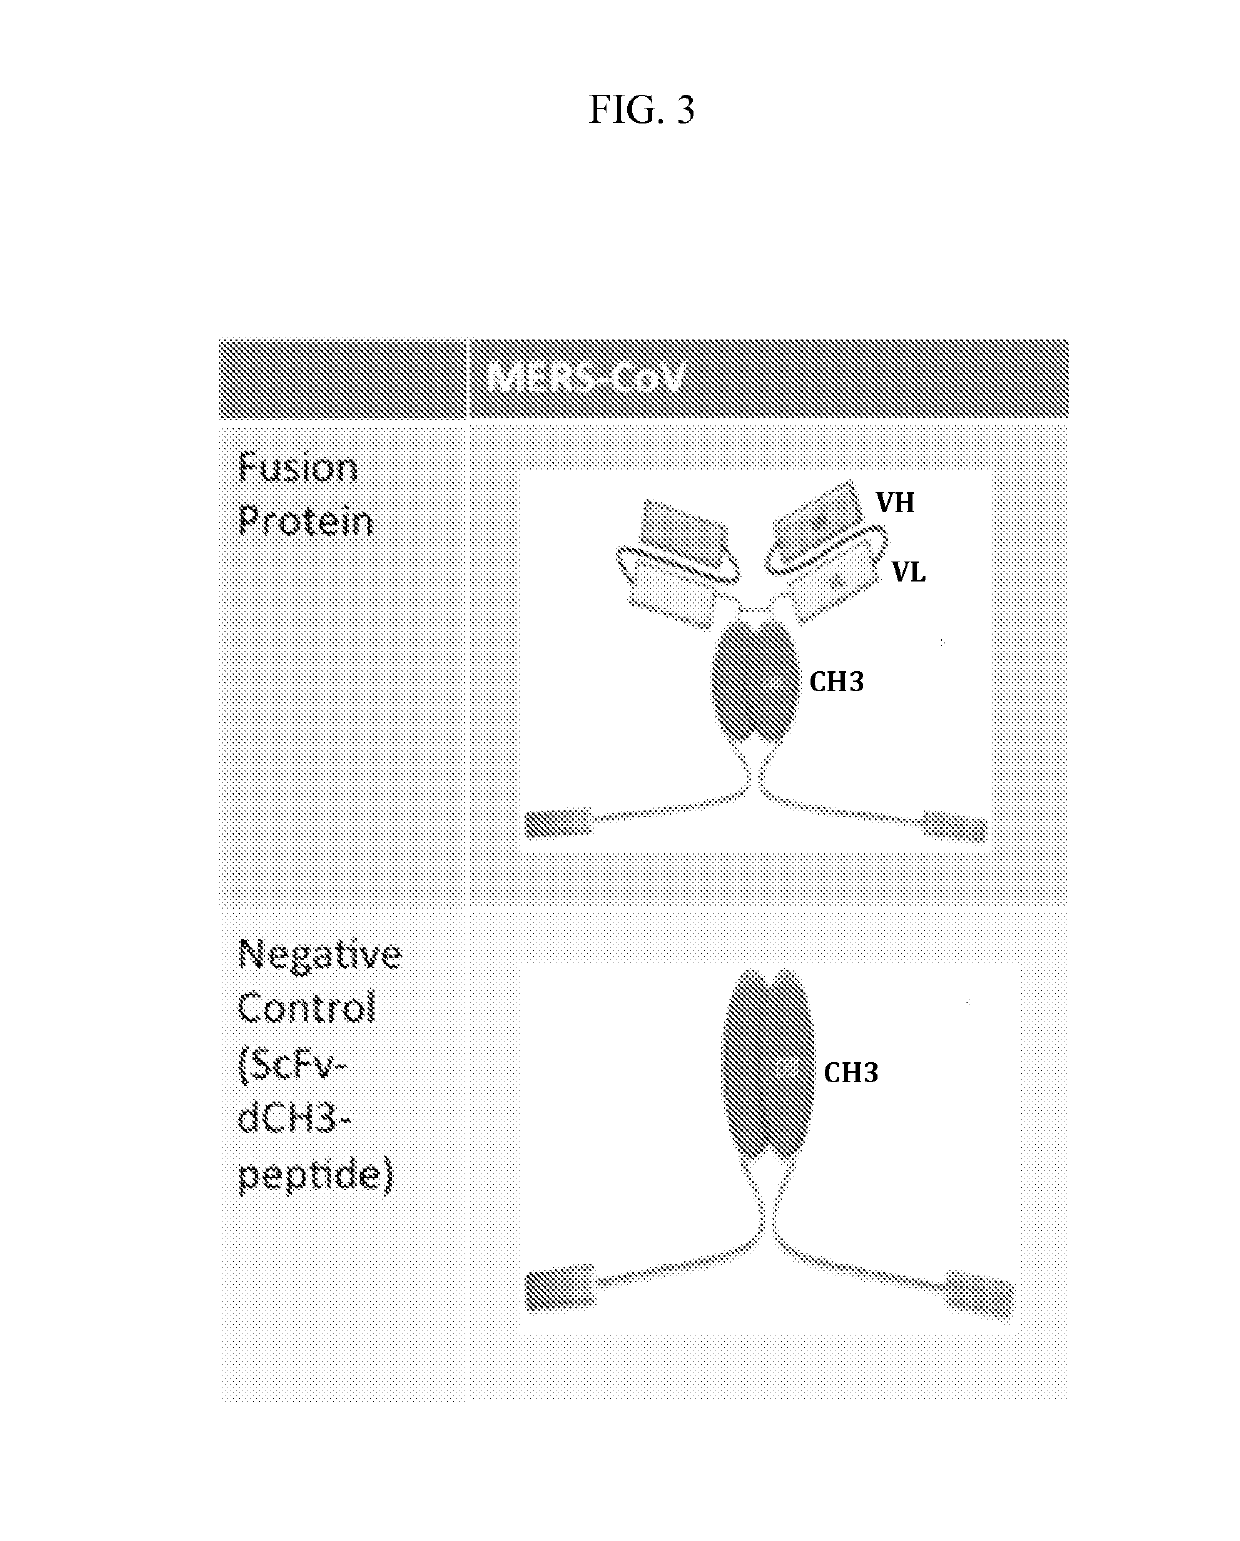 Human monoclonal antibodies against the middle east respiratory syndrome coronavirus (MERS-CoV) and engineered bispecific fusions with inhibitory peptides